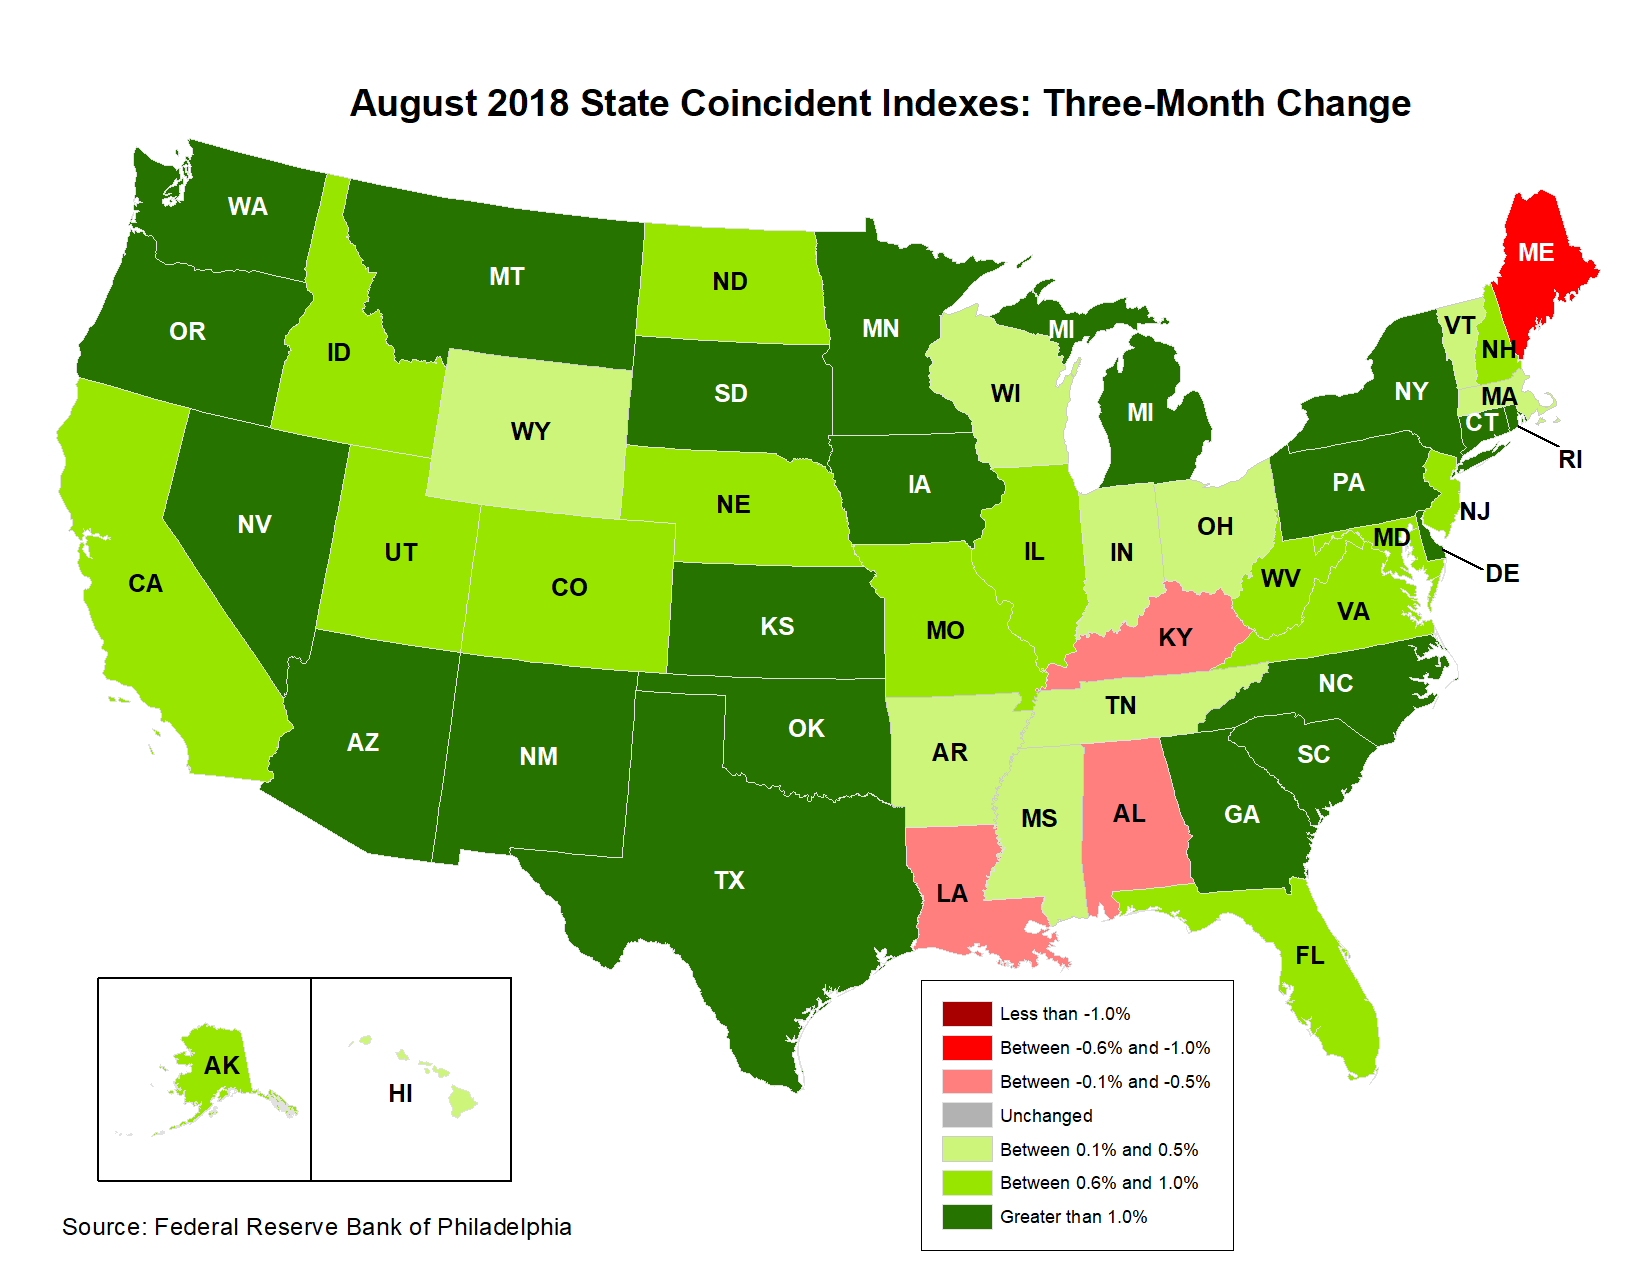 Map of the U.S. showing the State Coincident Indexes Three-Month Change in August 2018